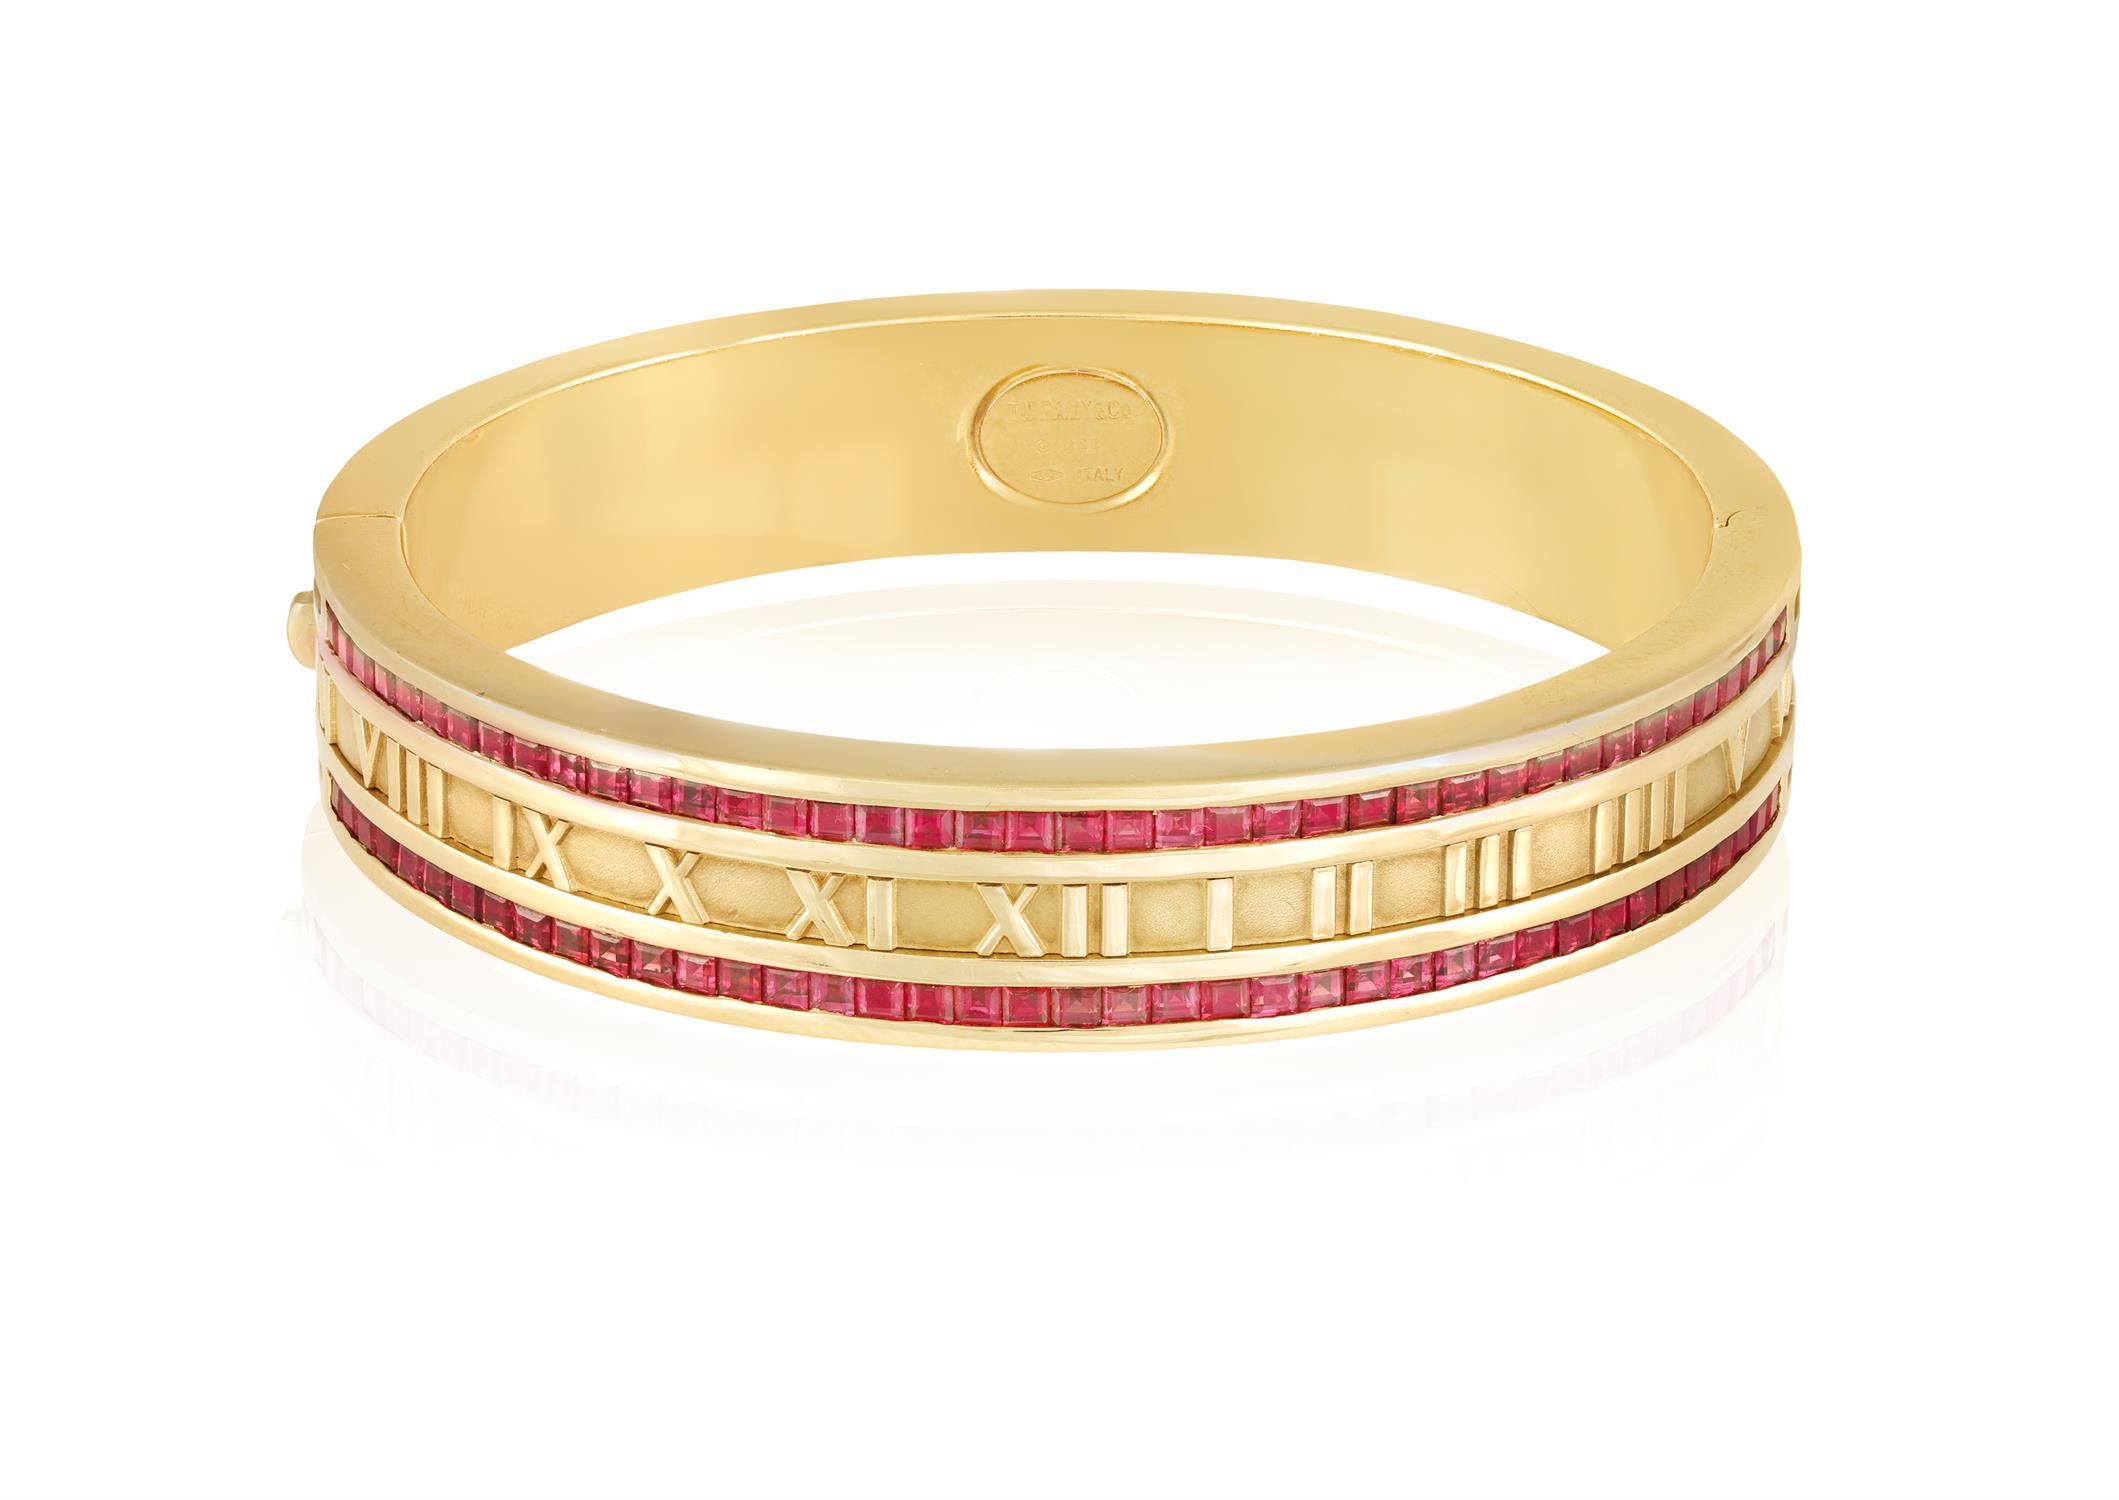 A RUBY-SET 'ATLAS' BANGLE, BY TIFFANY & CO., 1995 The hinged bangle with Roman numerals in